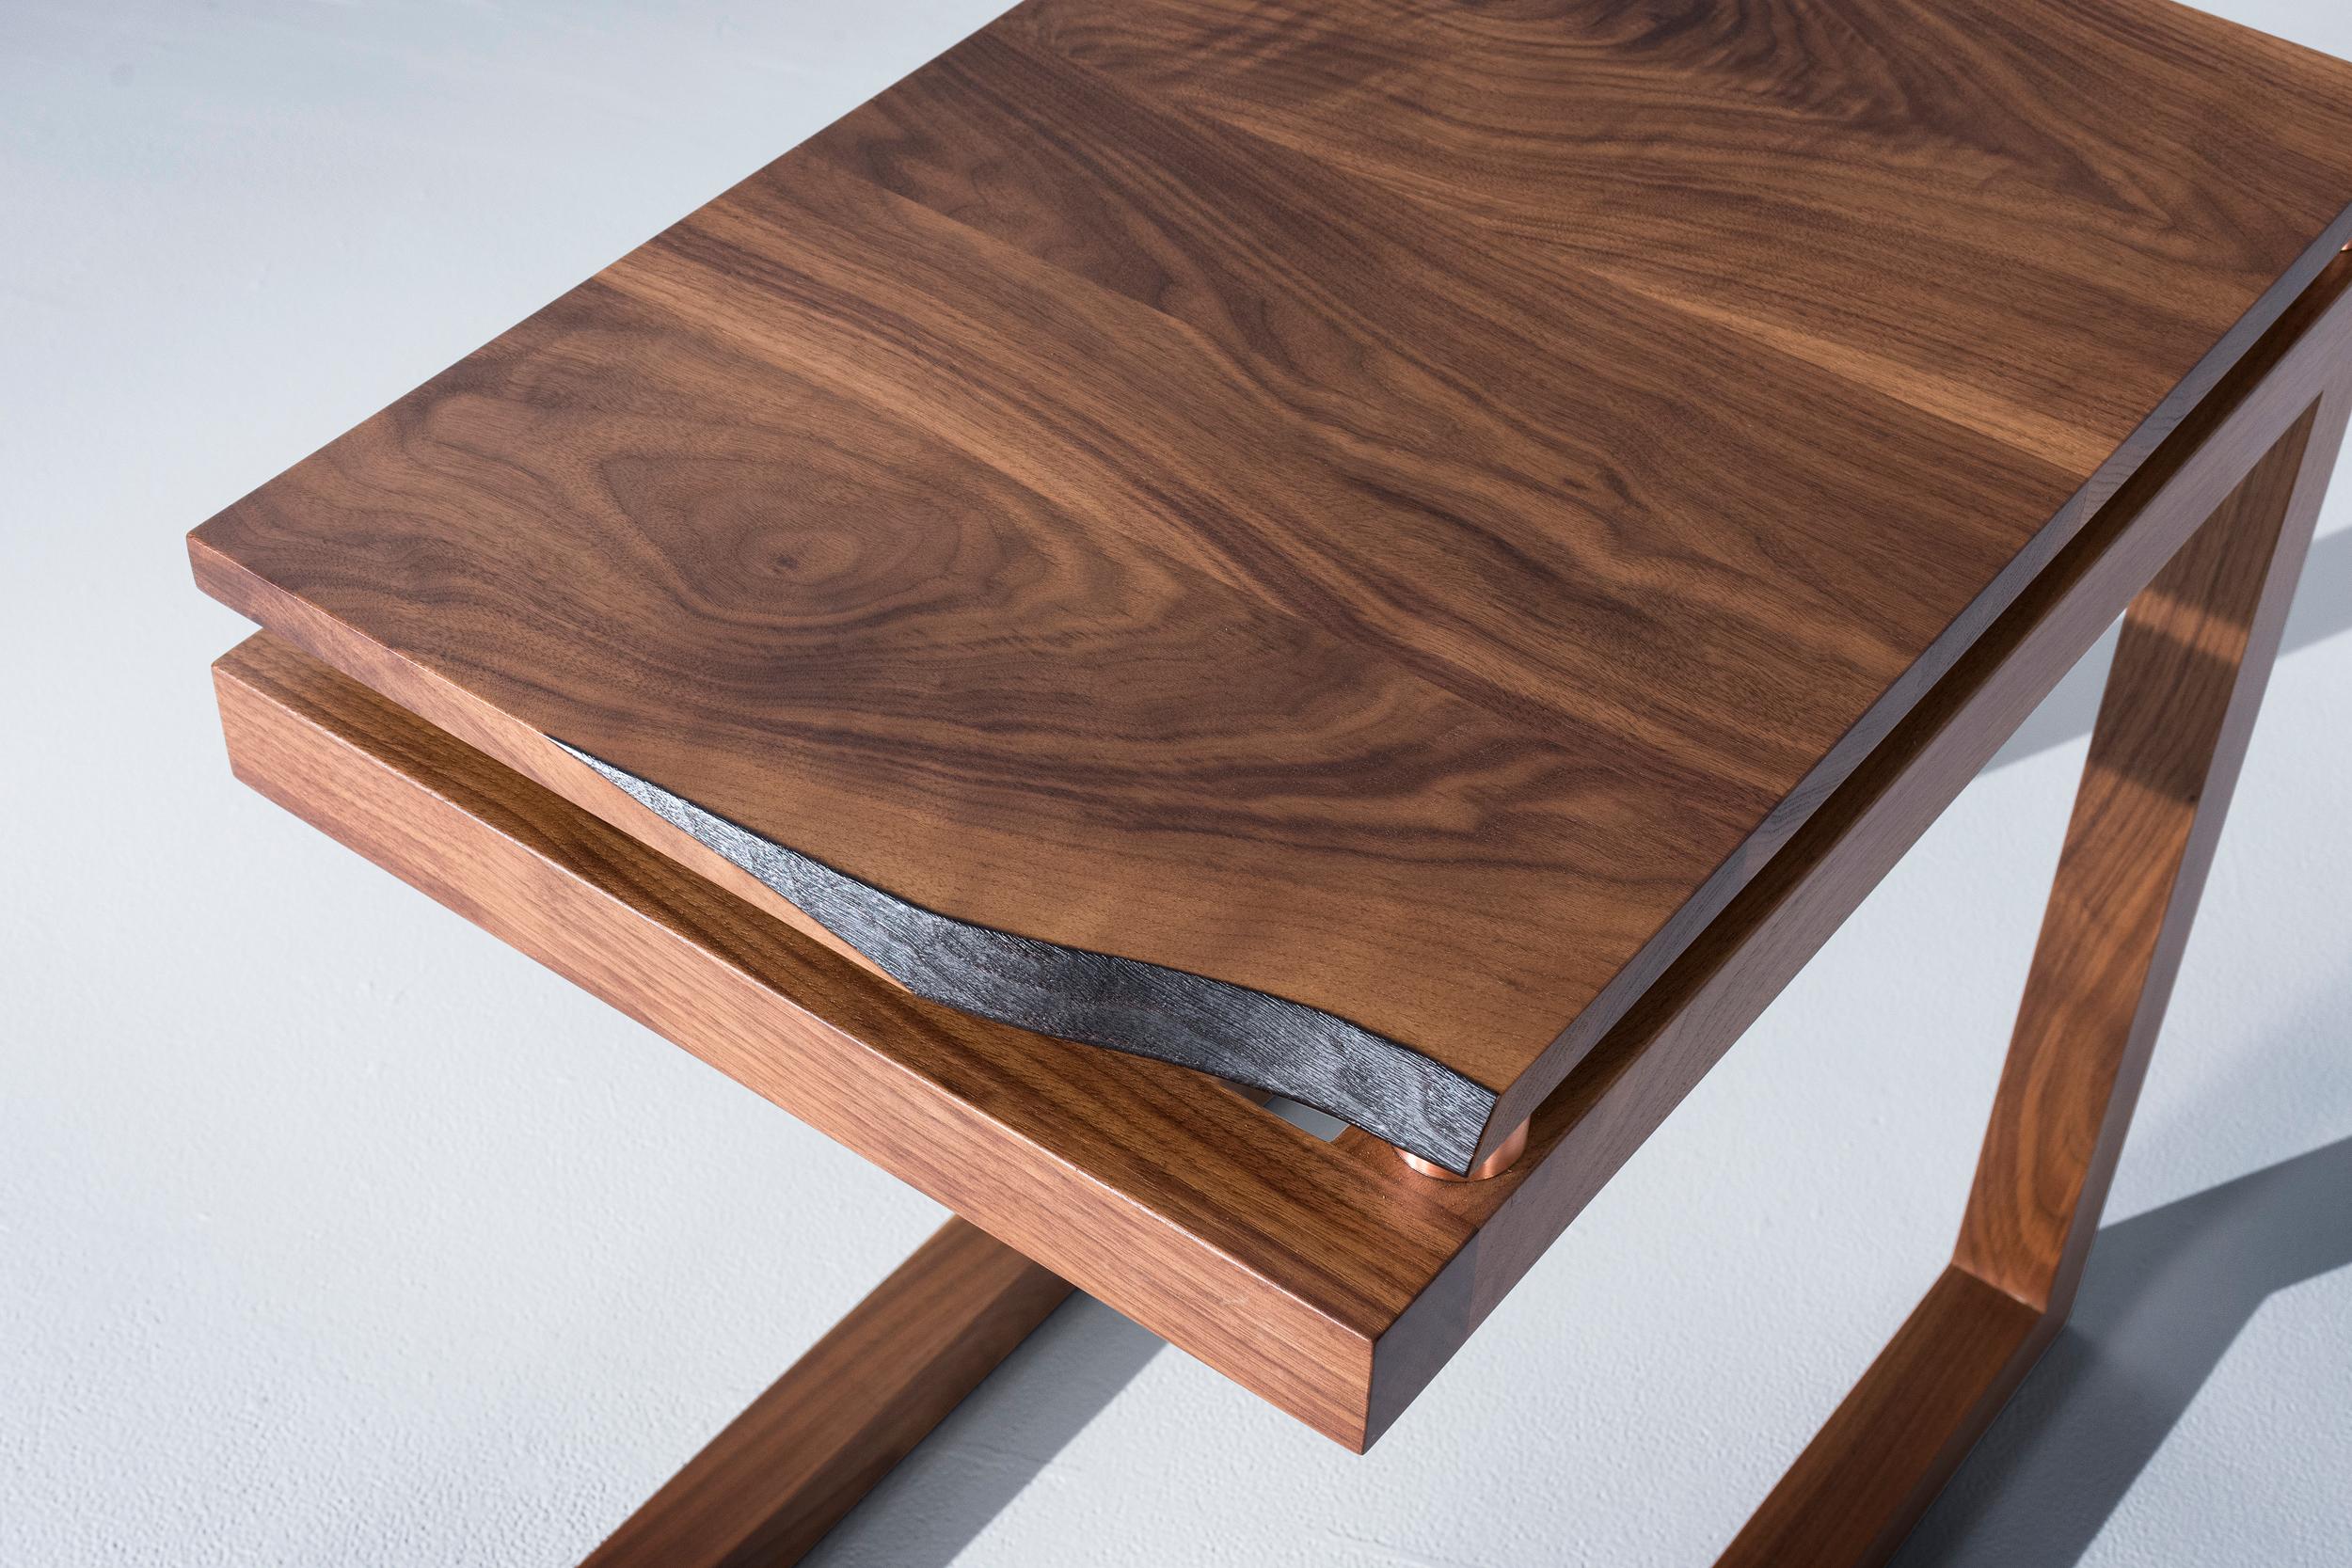 The Clairmount end tables have a walnut live edge board that is elevated using copper tubing to create a modern and organic look. The walnut base is made out of basic joinery to create a sharp modern look to the base of the end table. Pricing is per